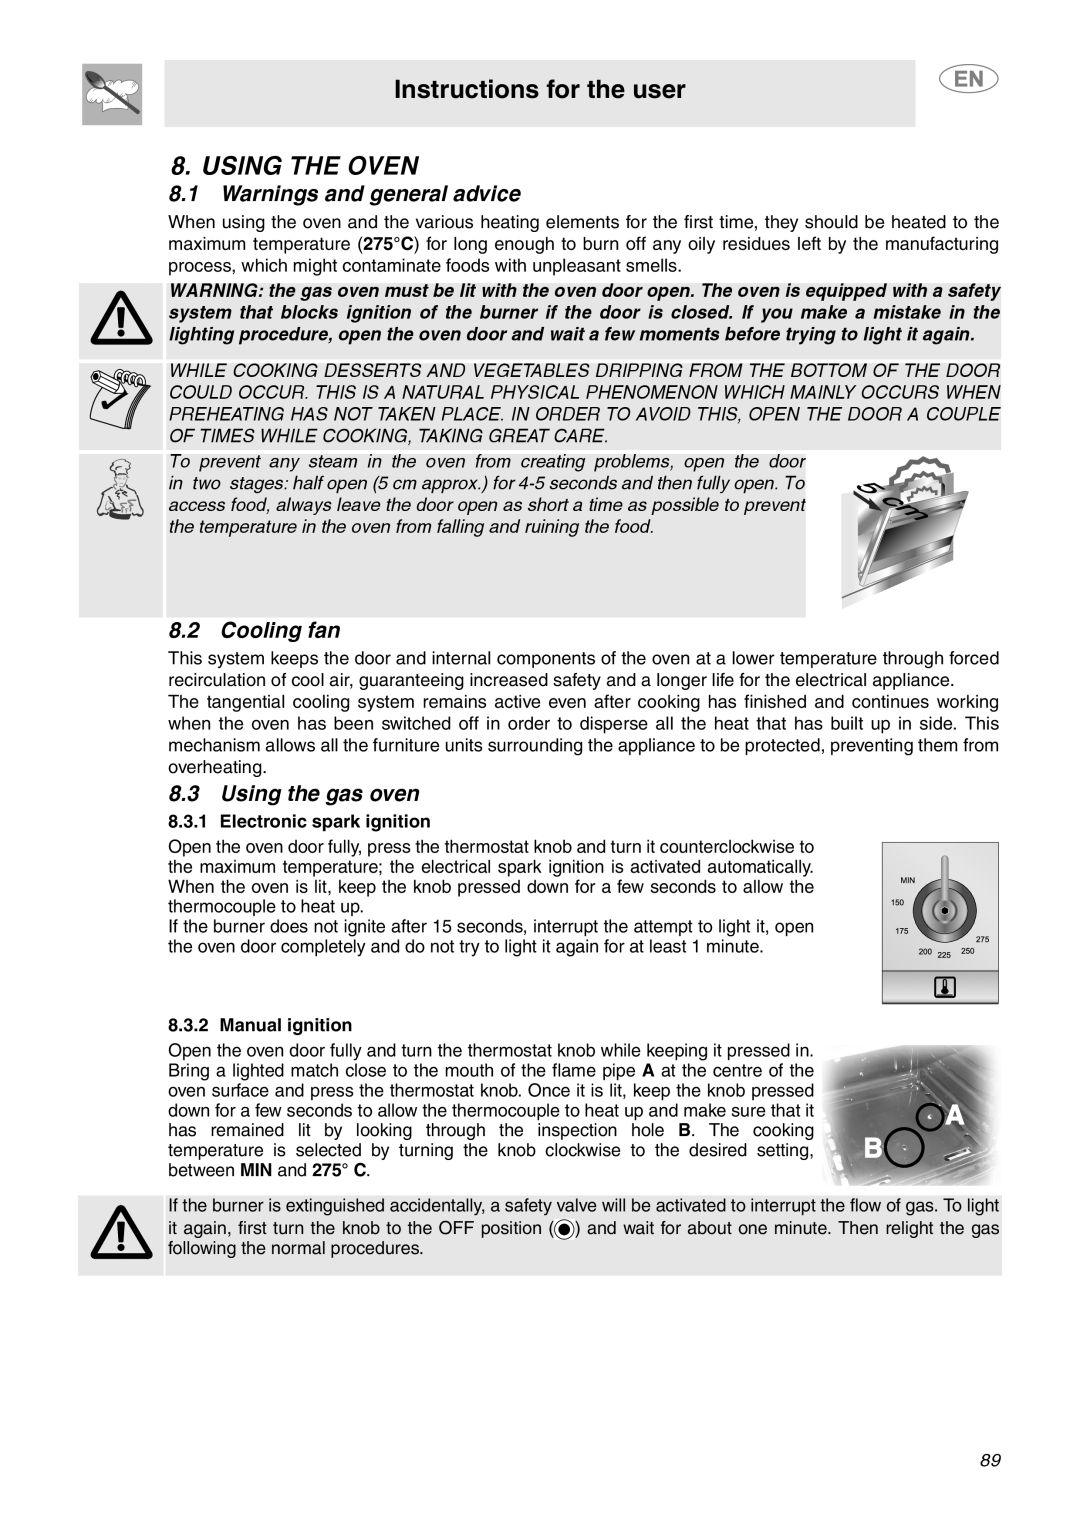 Smeg C6GVXI manual Using The Oven, Warnings and general advice, Cooling fan, Using the gas oven, Instructions for the user 